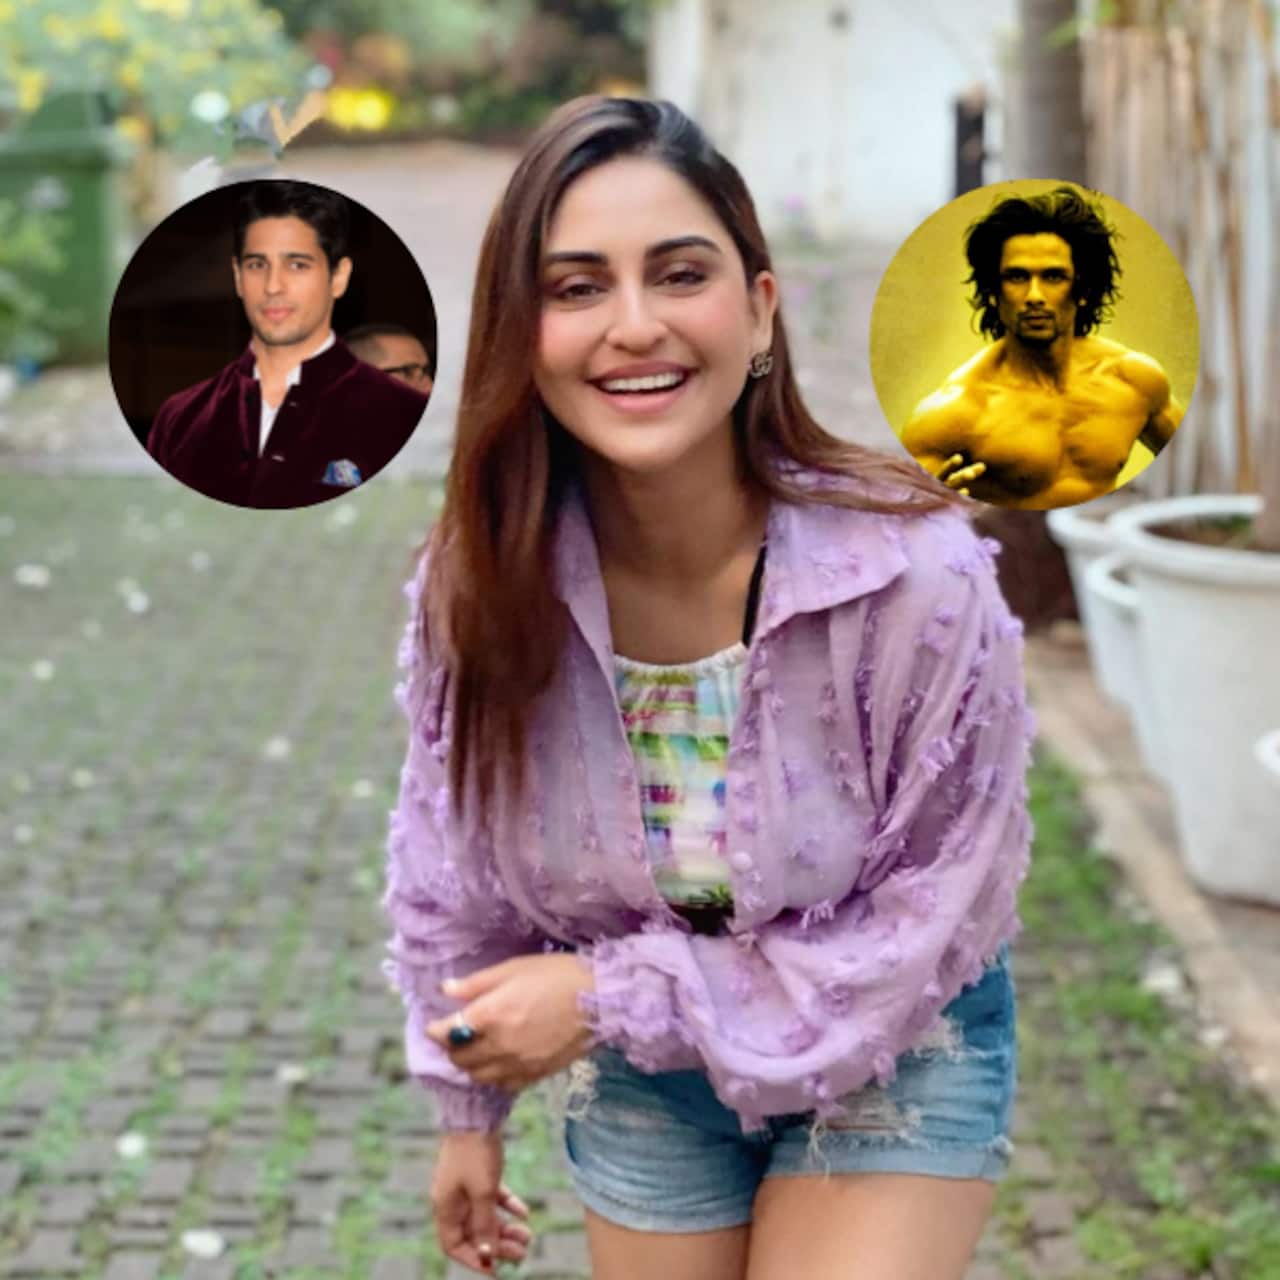 Krystle D'Souza wants Sidharth Malhotra to do Shahid Kapoor's Kaminey type roles – here's why [Exclusive]